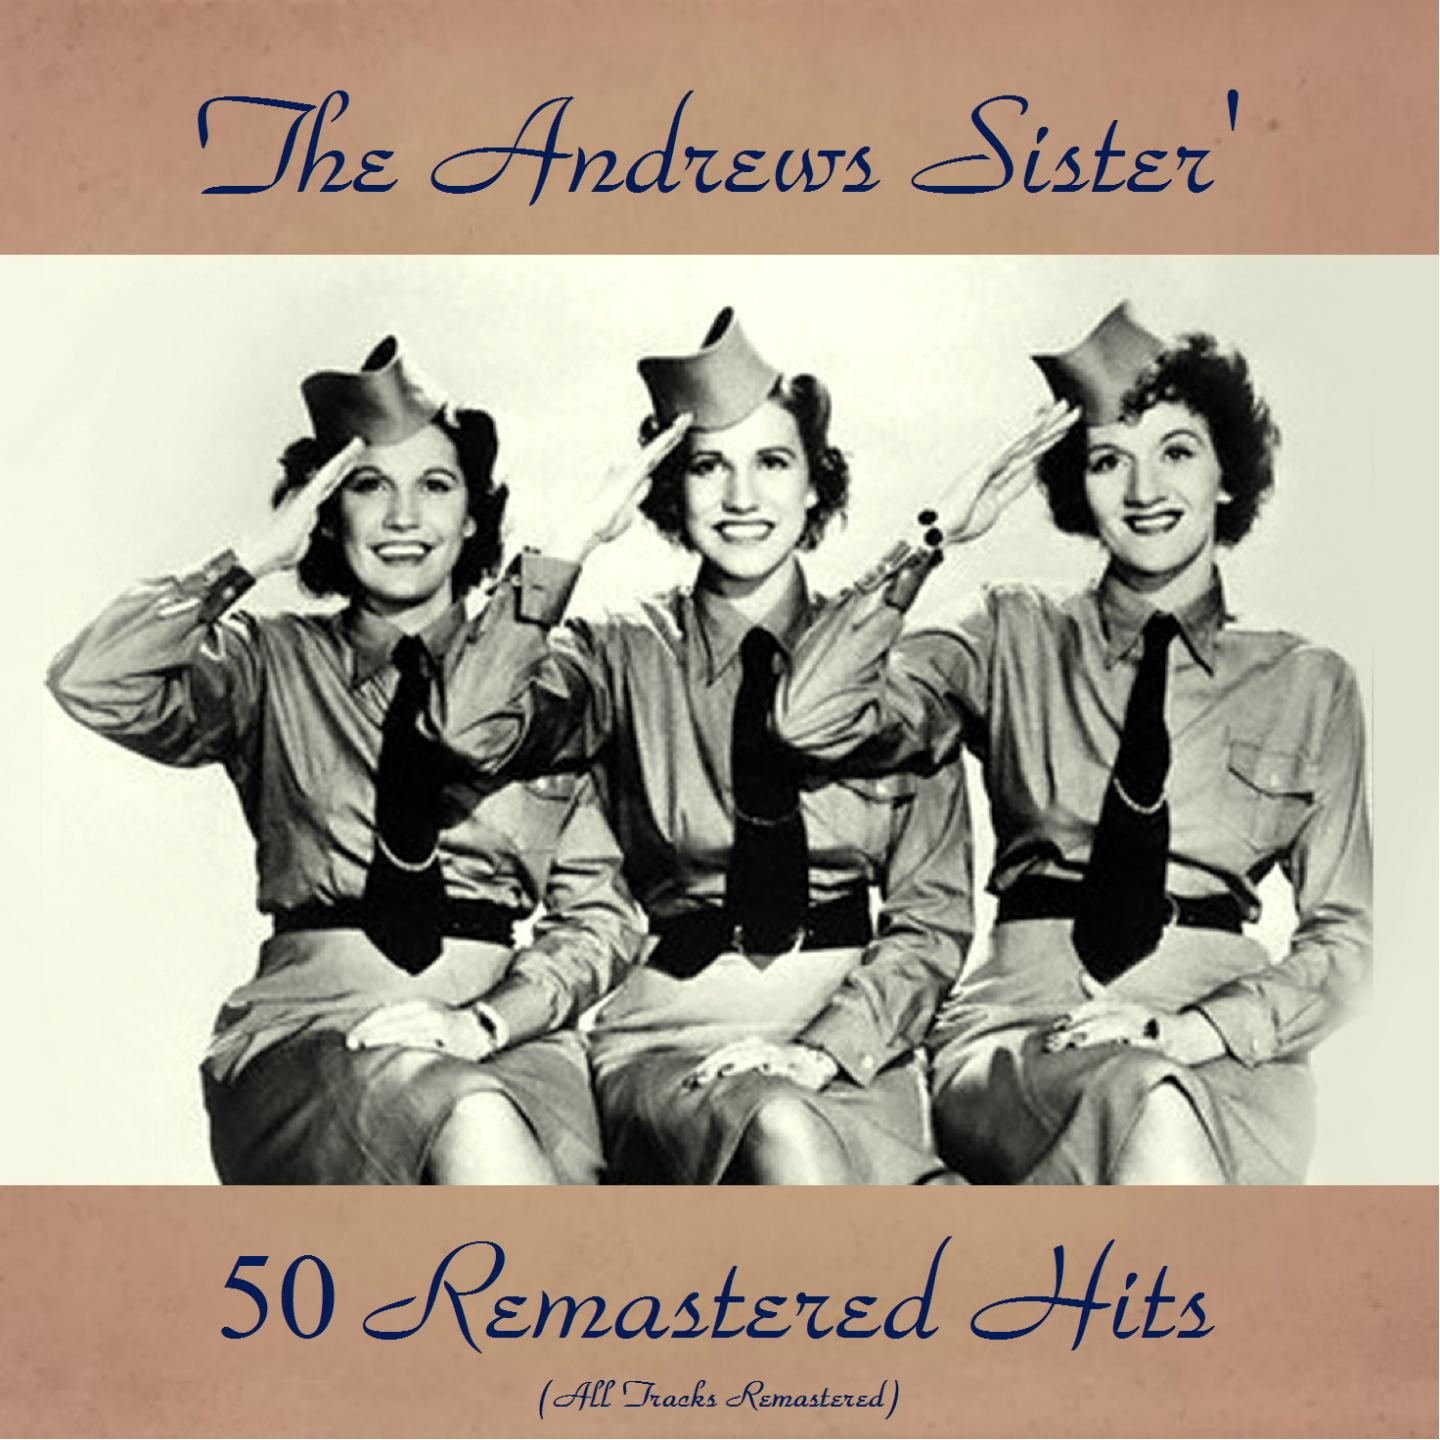 Bei mir bist du schon. The Andrews sisters. Группа the Pointer sisters. The best of Andrews sisters. The Andrews sisters фото.